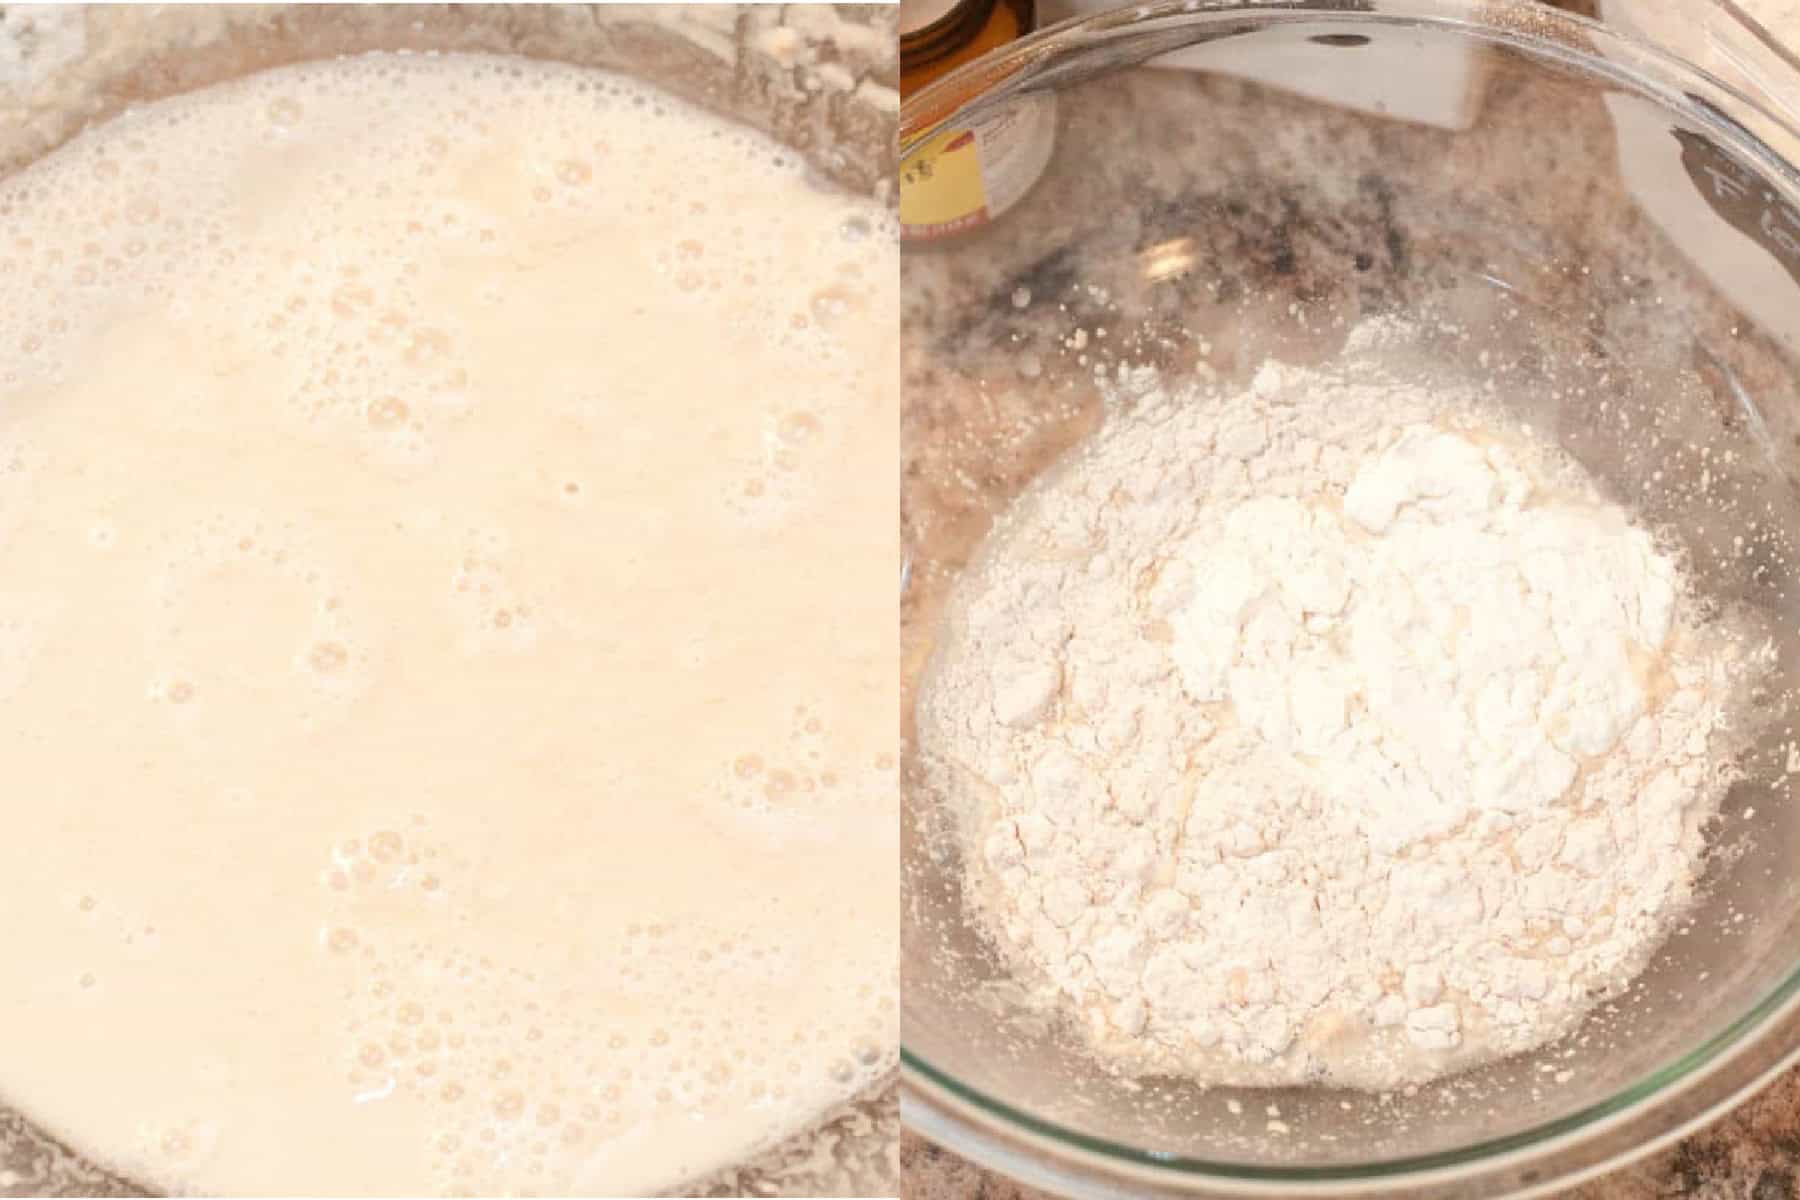 activated yeast and the some flour added to it in a bowl.